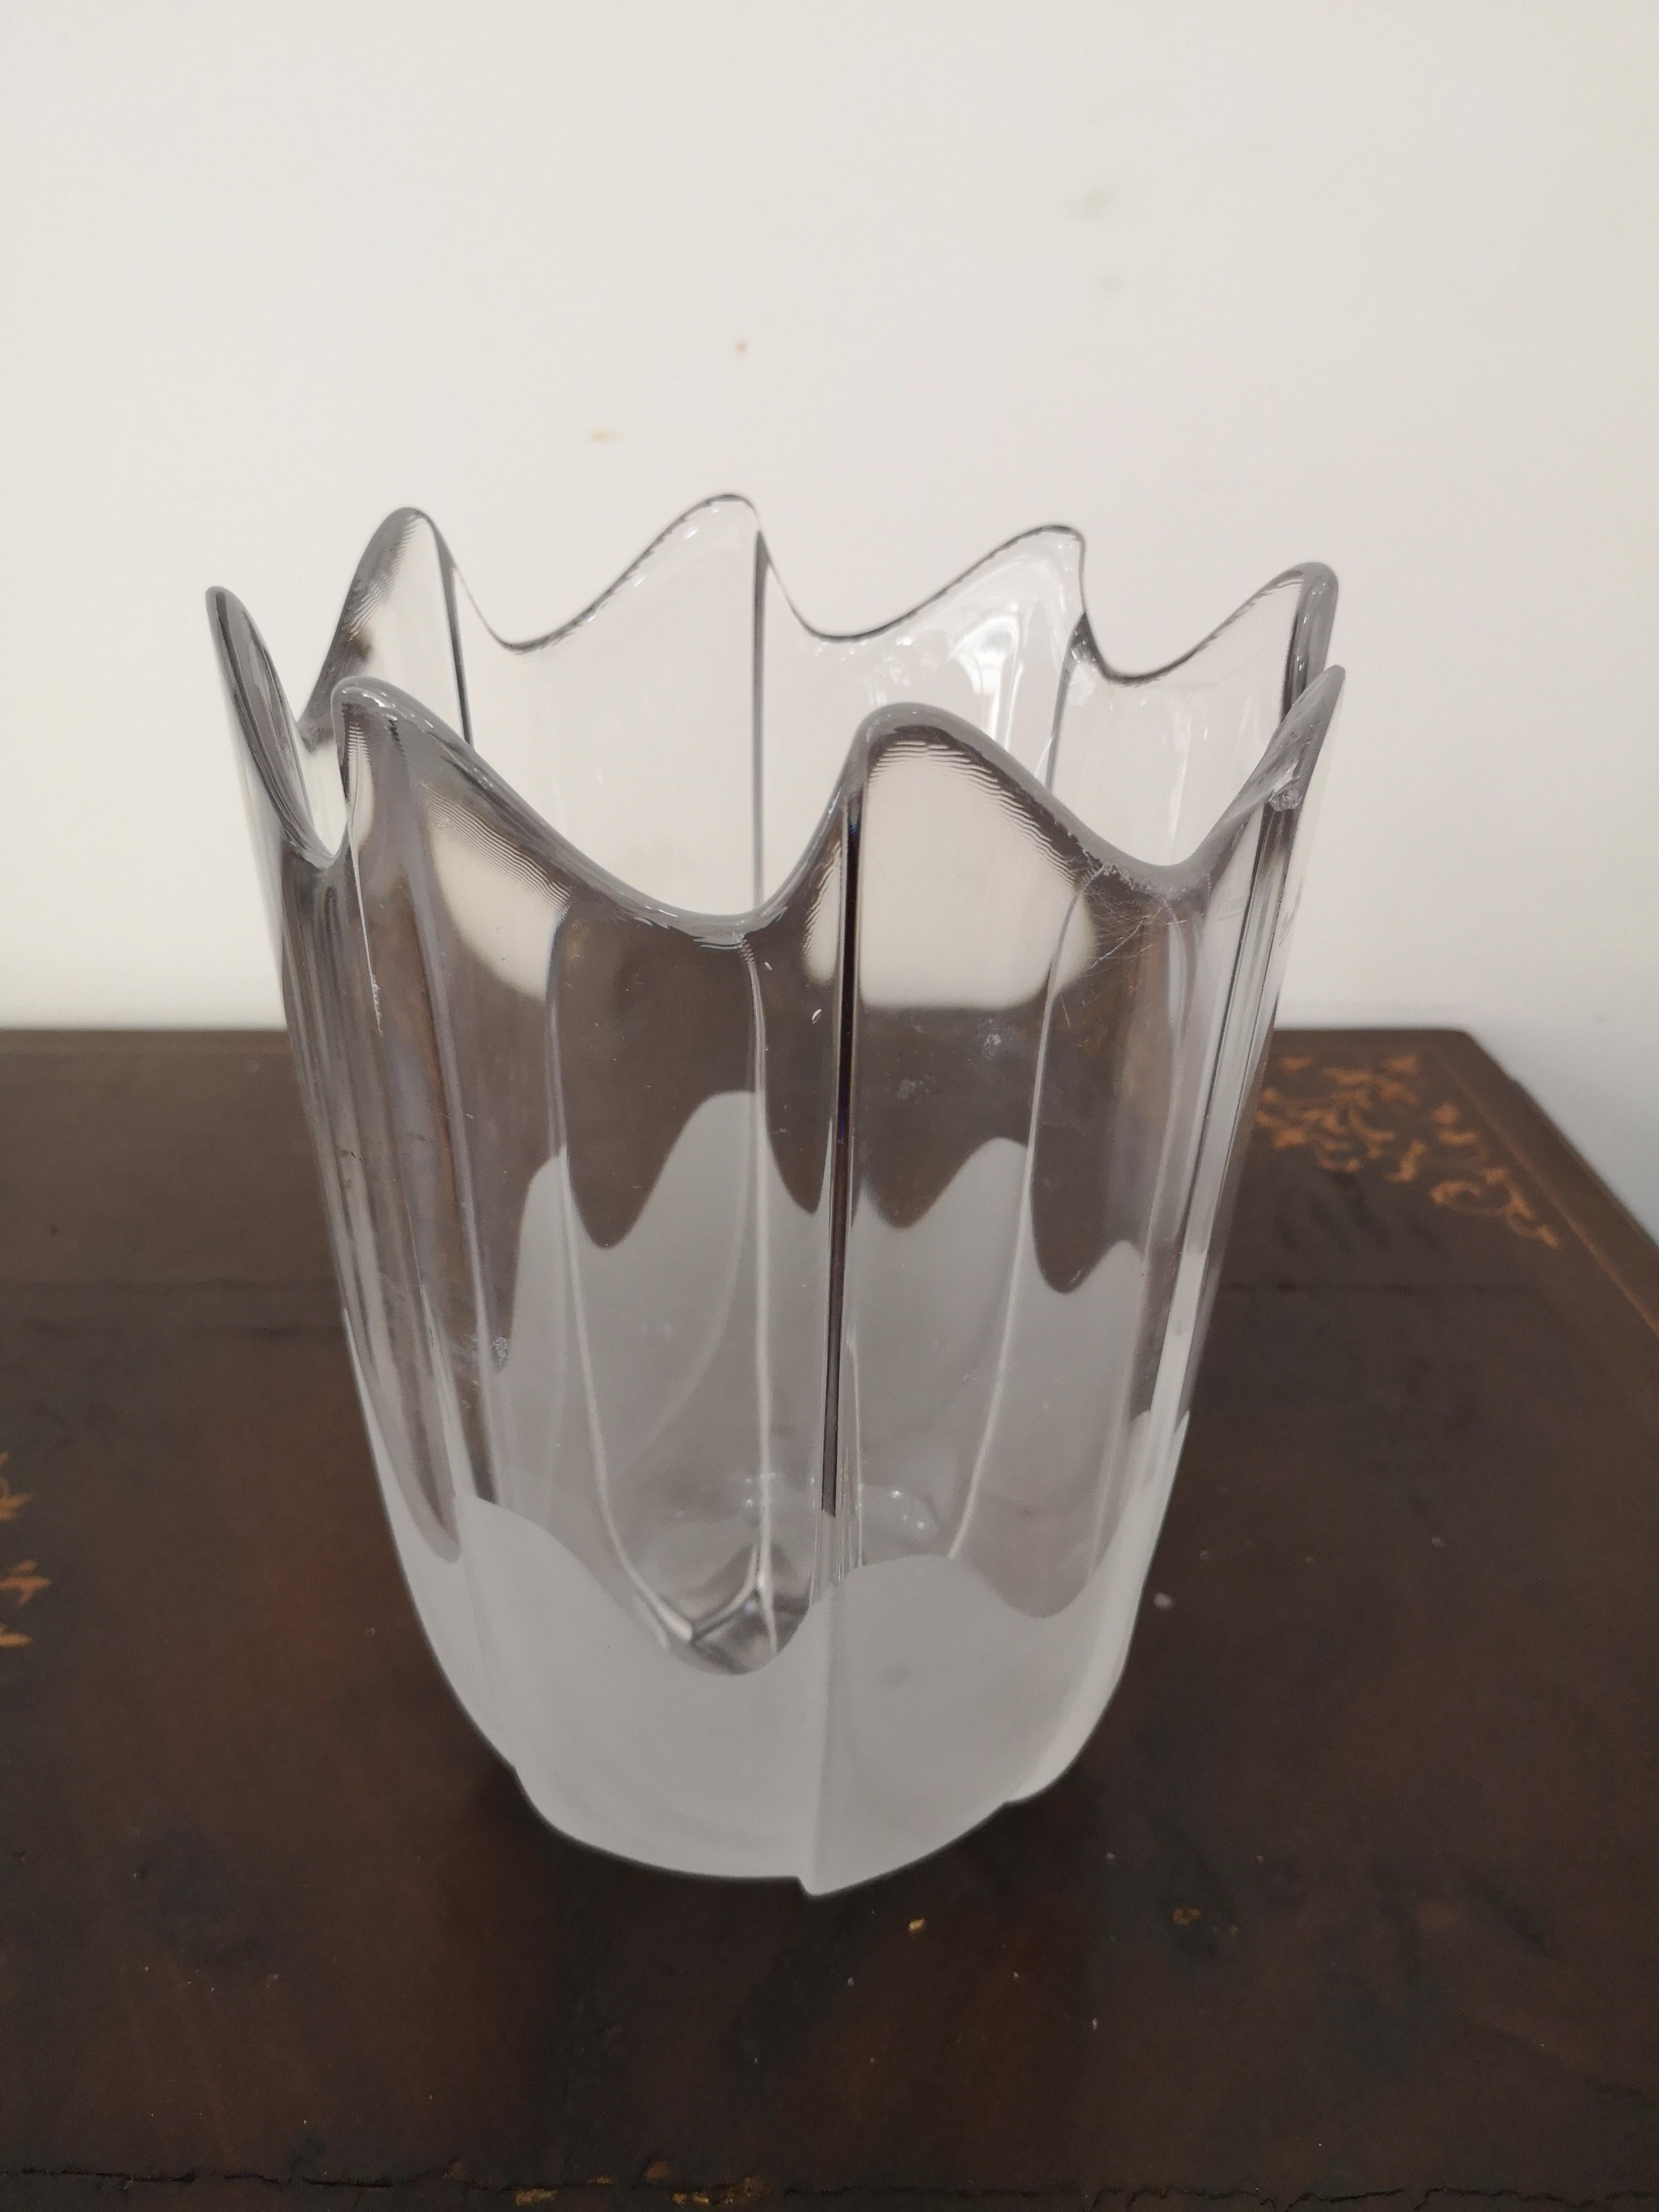 Rosenthal Studio Line vase 1980s 
frosted glass at the bottom and transparent
in the upper part.
The vase measures 20 cm in height
and in width cm 15
The vase is in good condition but has
a small chipping visible in the last photos

Rosenthal Studio